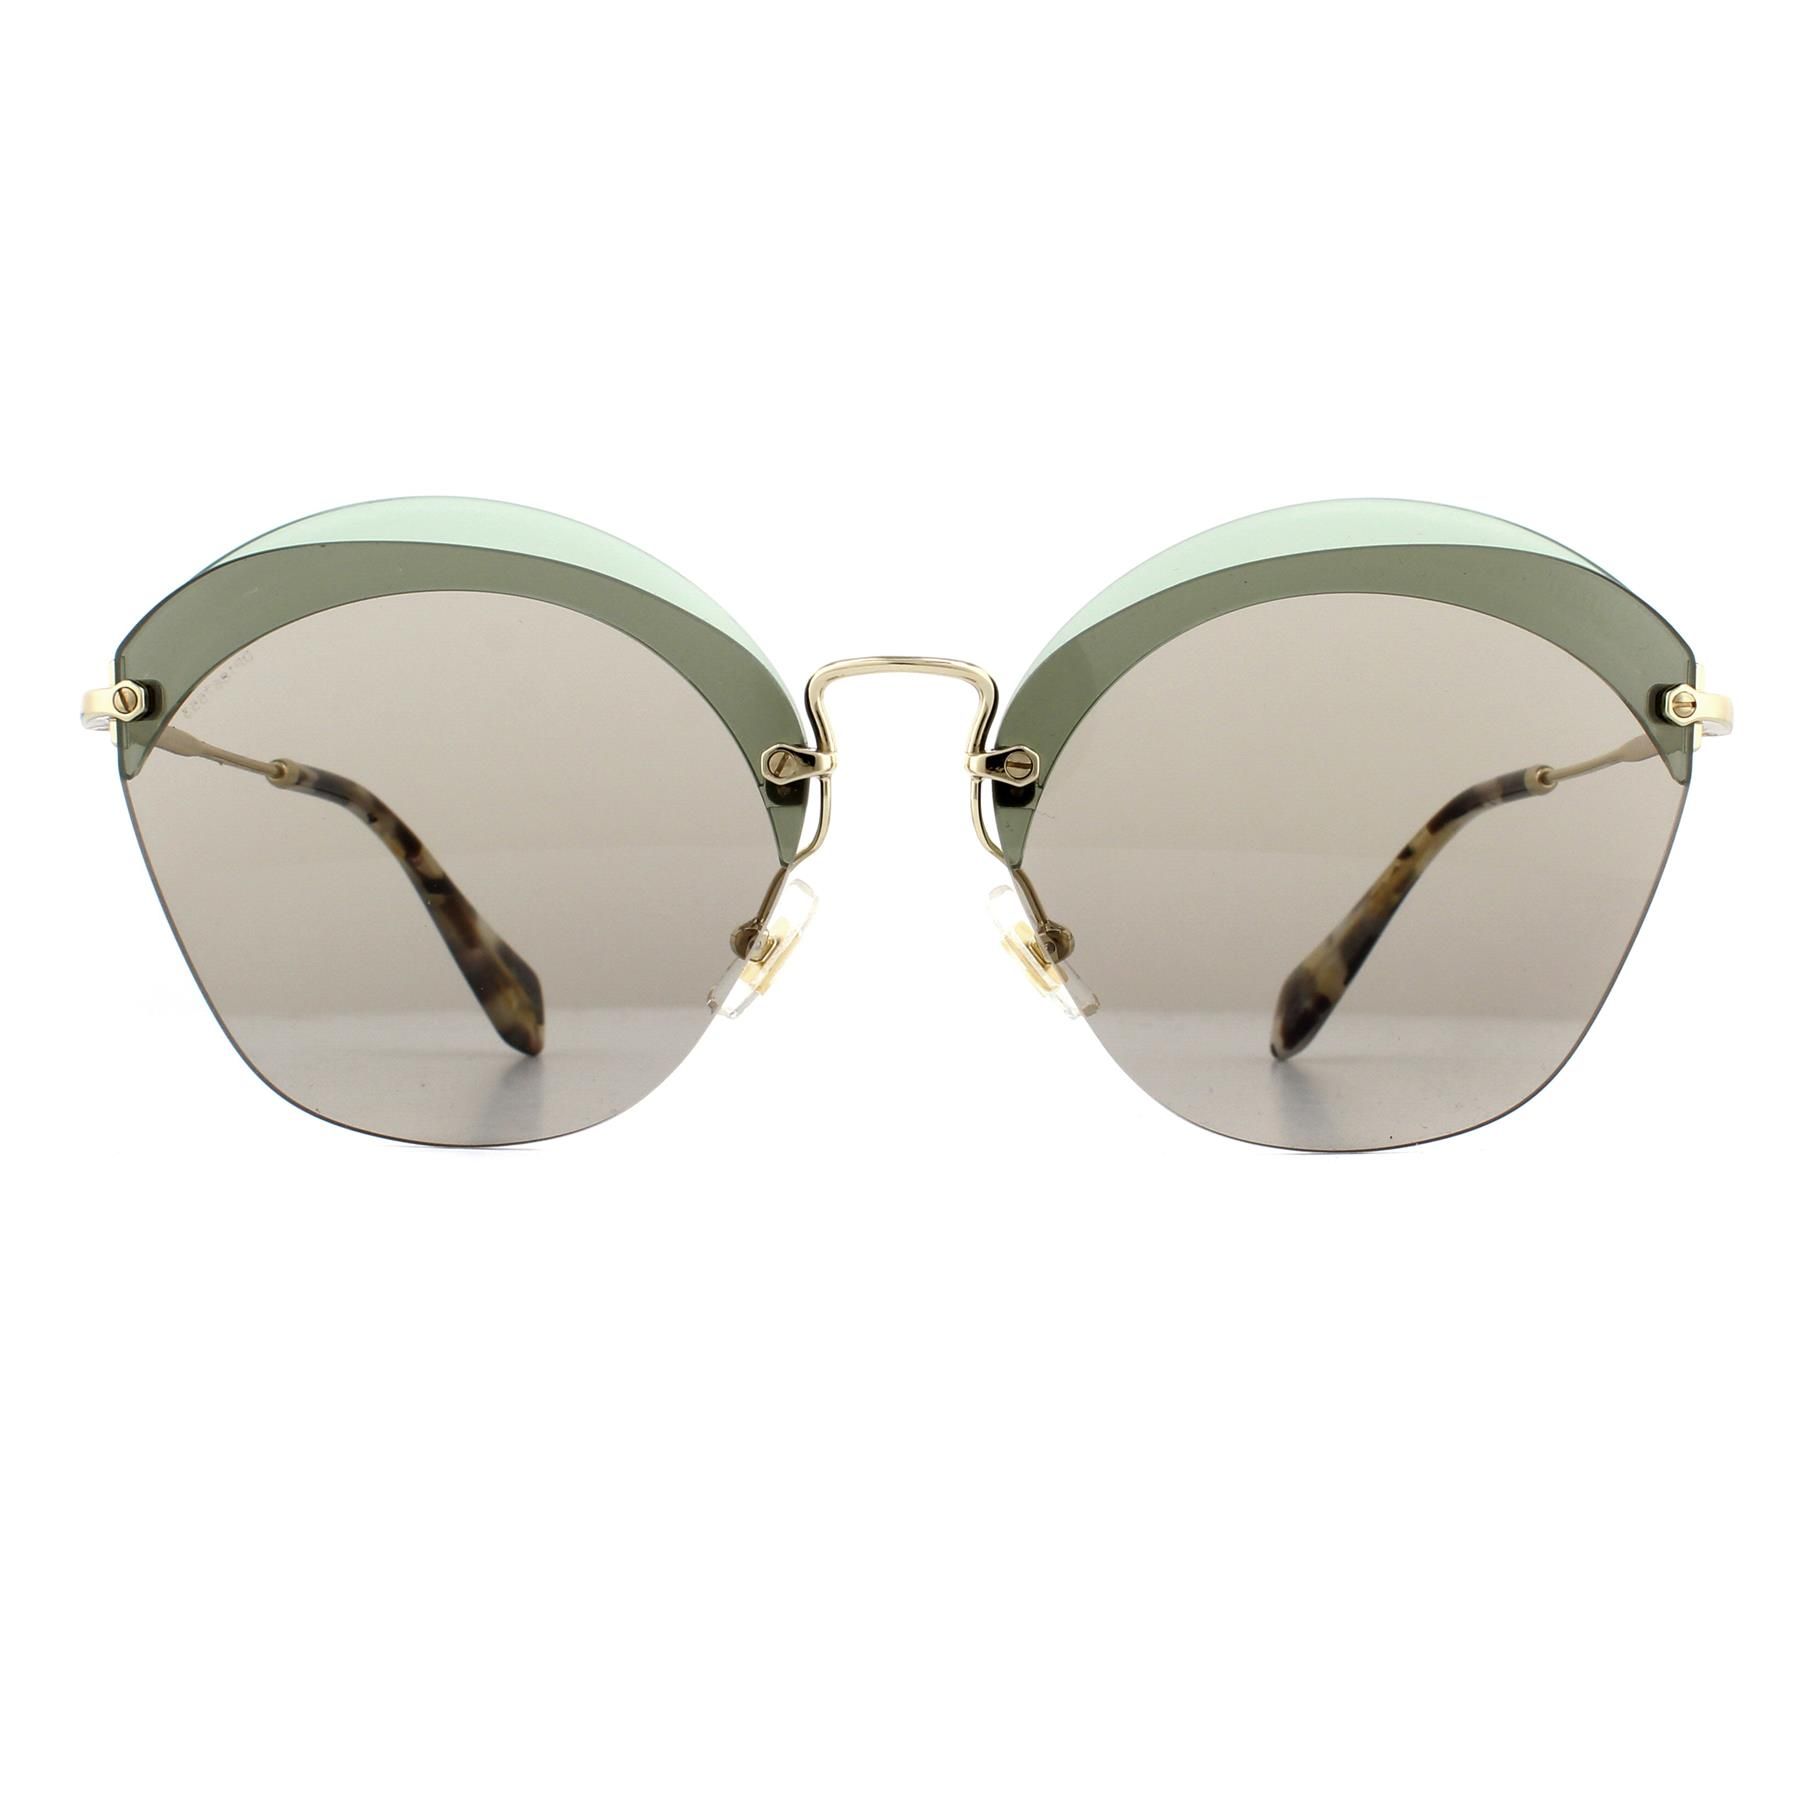 Miu Miu Sunglasses MU 53SS VX15J2 Green & Gold Light Brown have a multi-dimensional look with 2 lenses and slim metal arms for a really poised elegant finish with typical Miu Miu panache